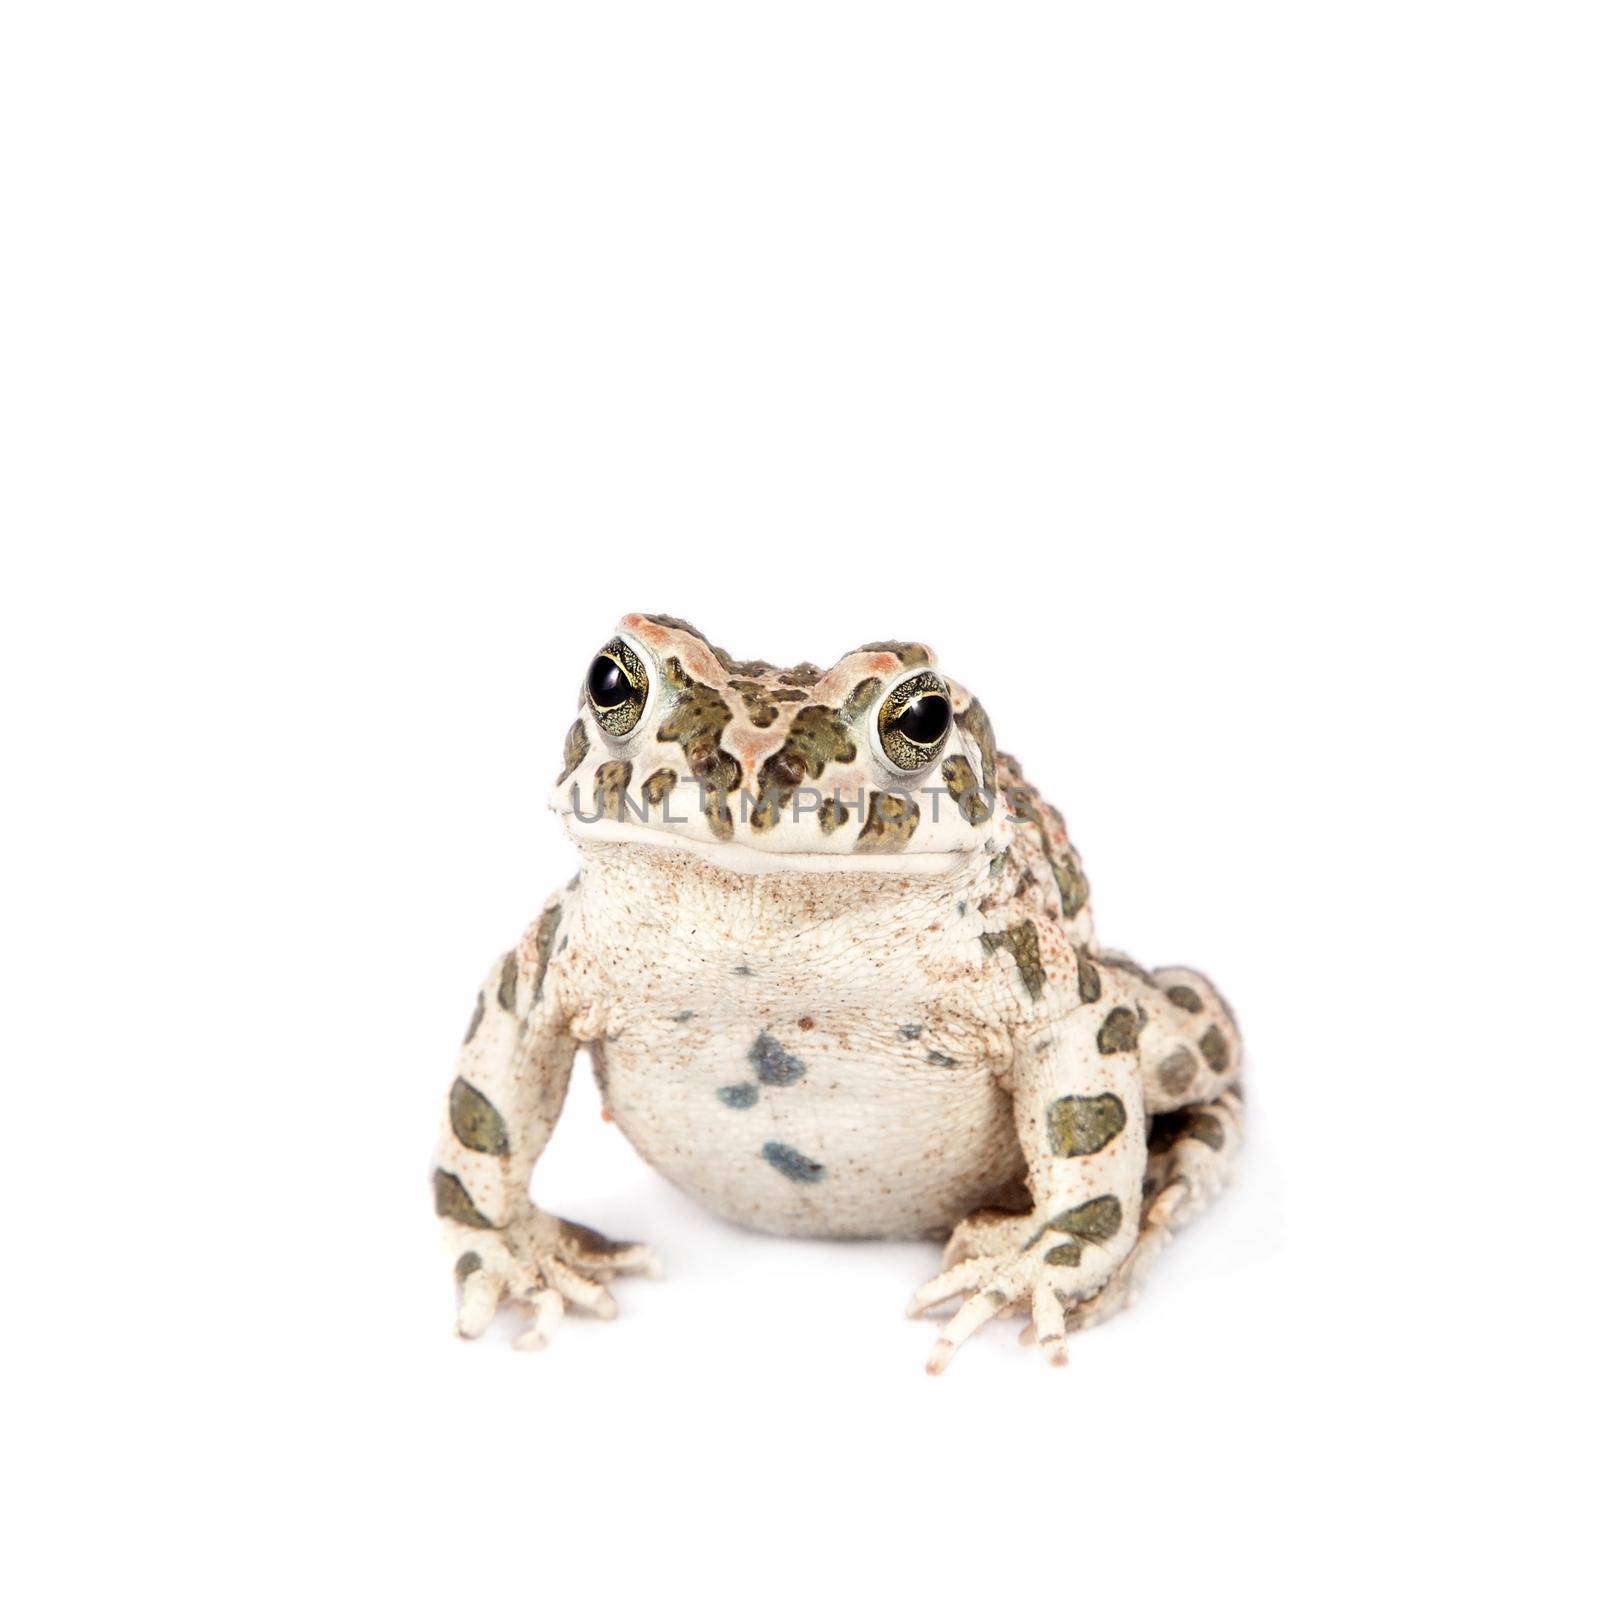 The Egyptian green toad on white by RosaJay